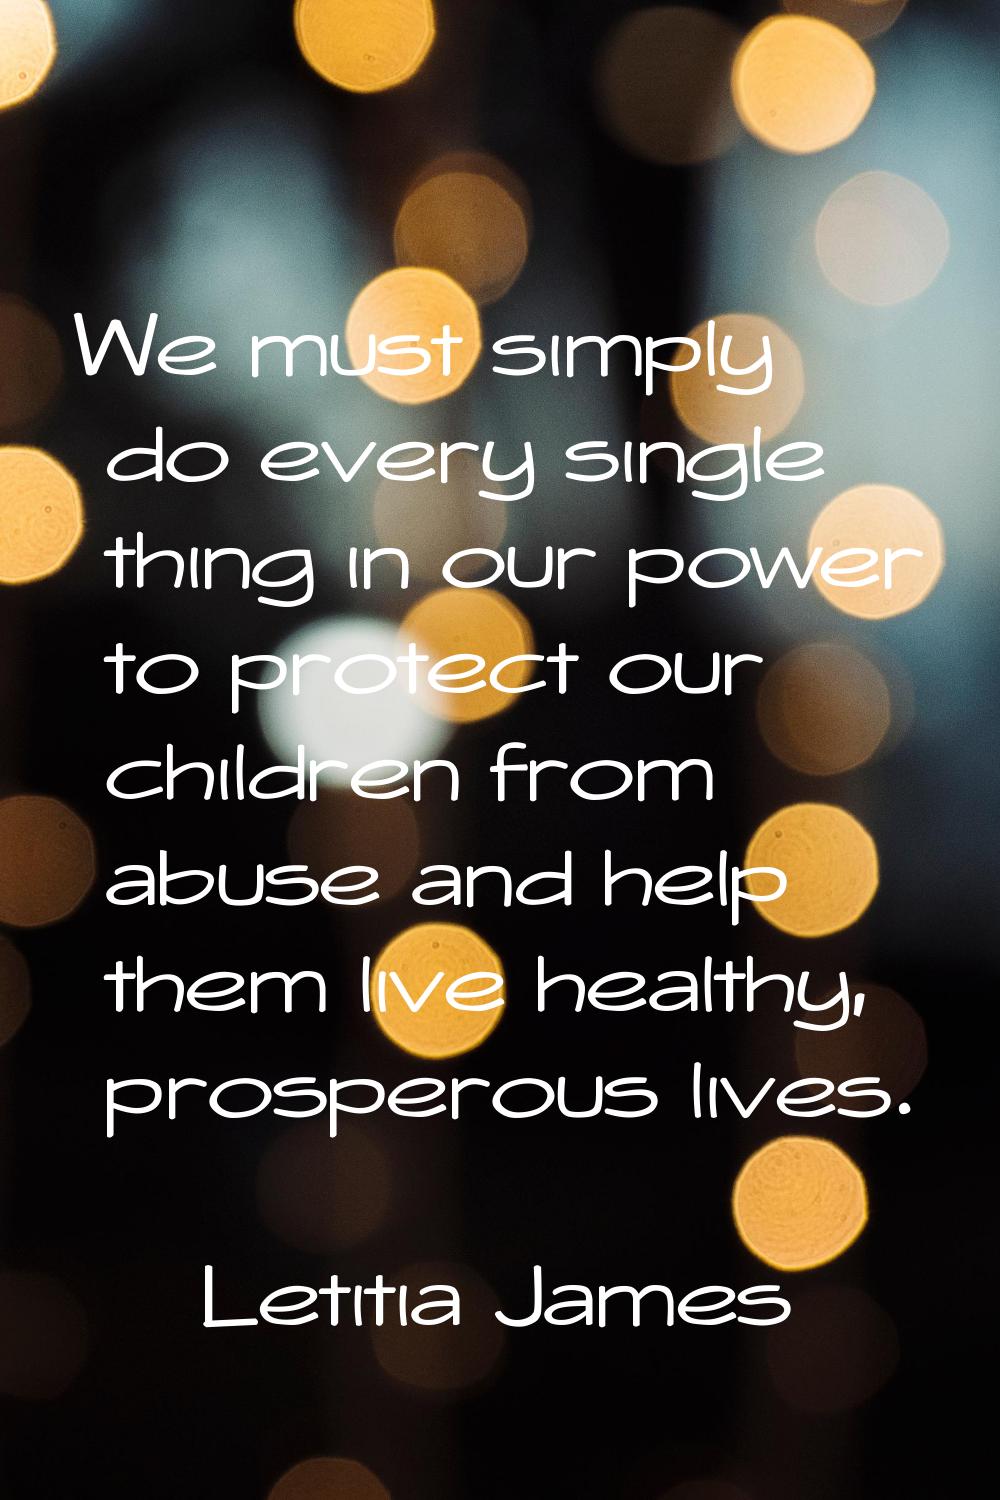 We must simply do every single thing in our power to protect our children from abuse and help them 